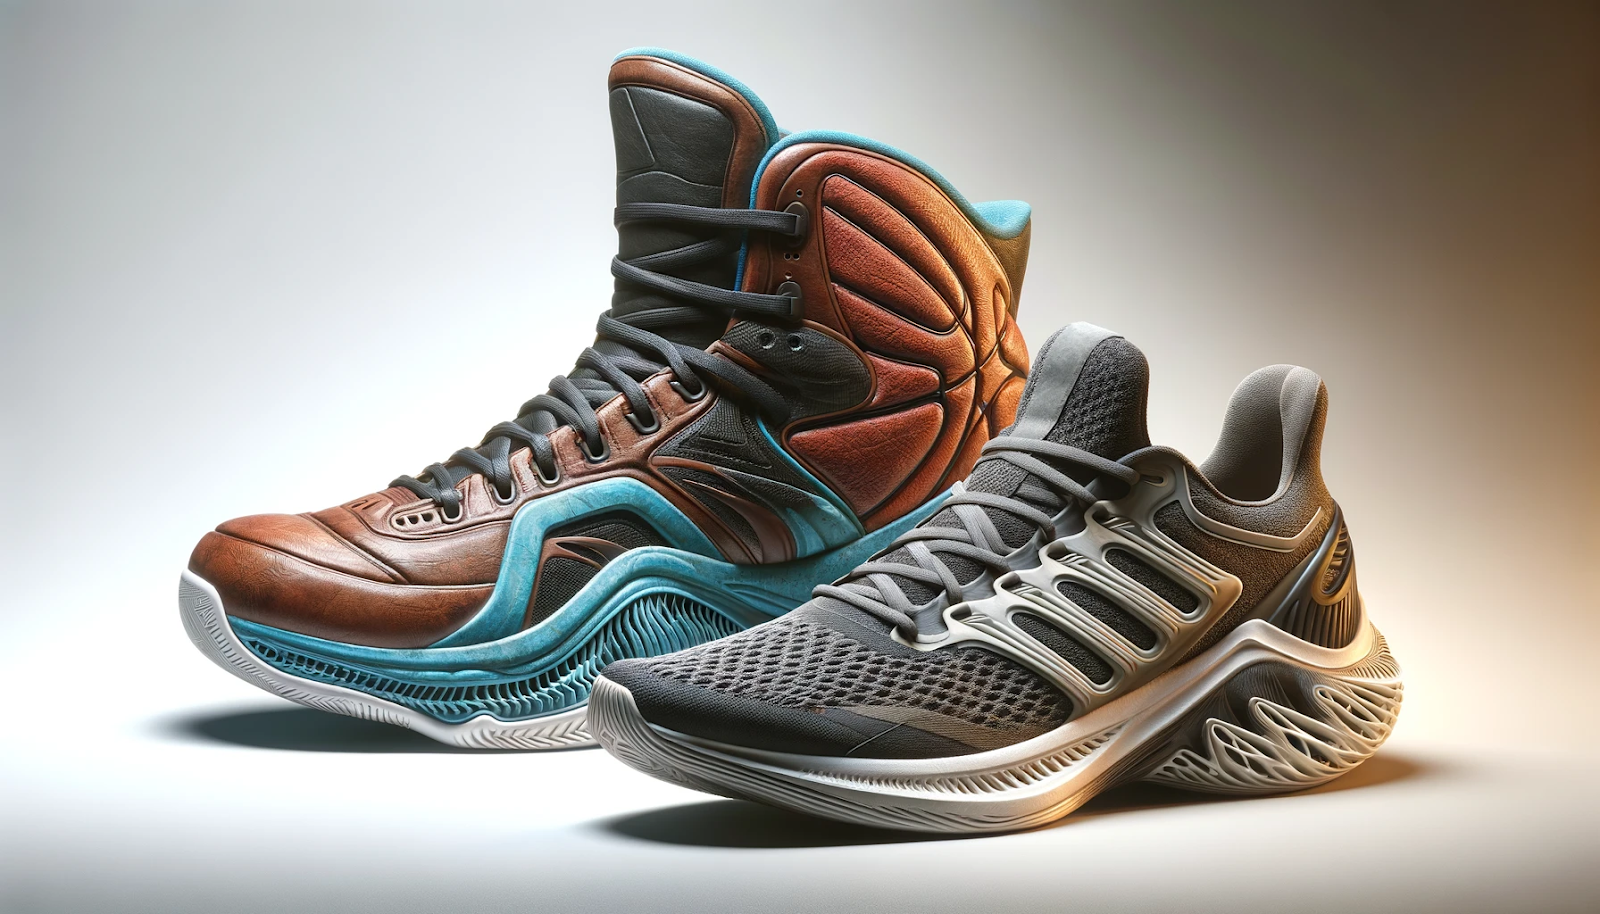 Basketball Shoes vs. Running Shoes: A Direct Comparison